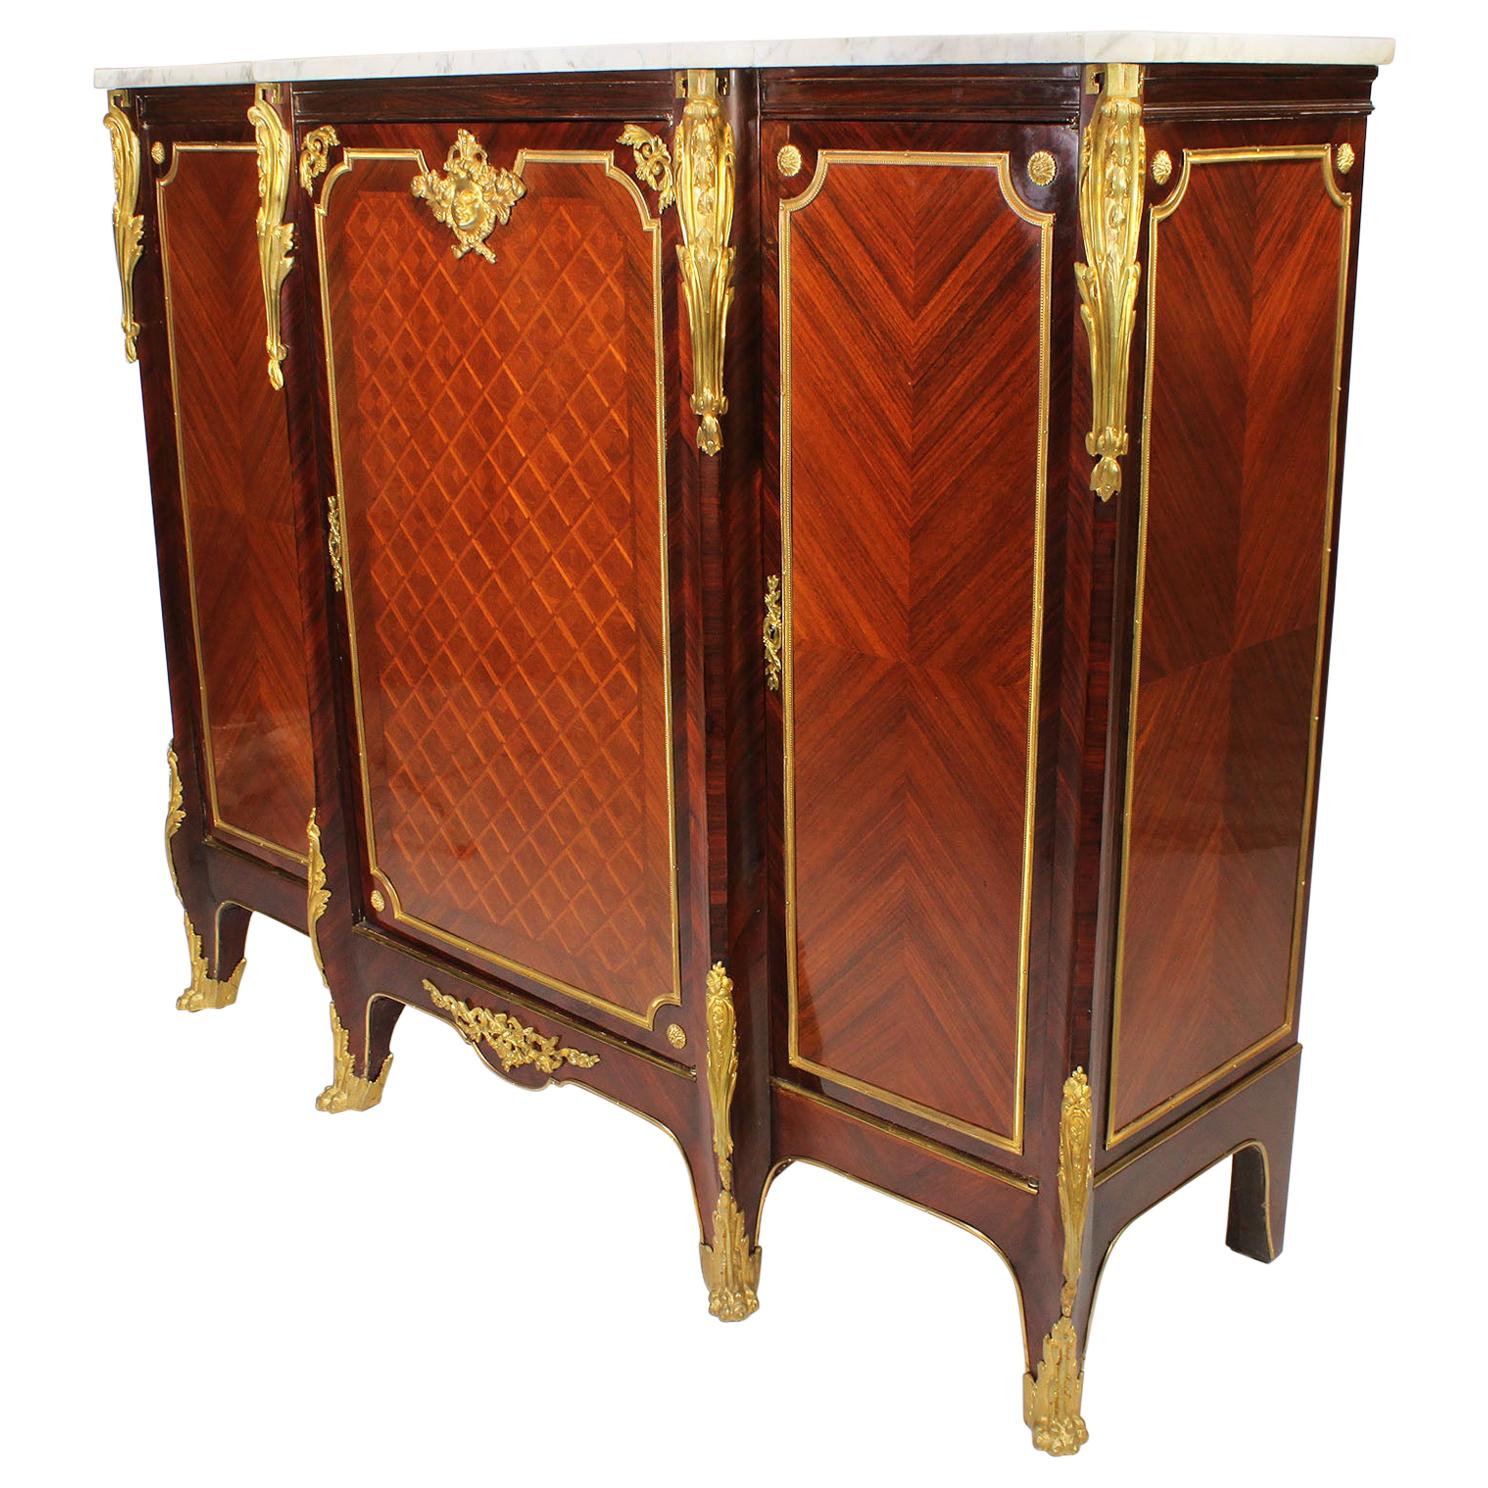 French 19th-20th Century Louis XV Style Tulipwood & Gilt-Bronze Mounted Cabinet